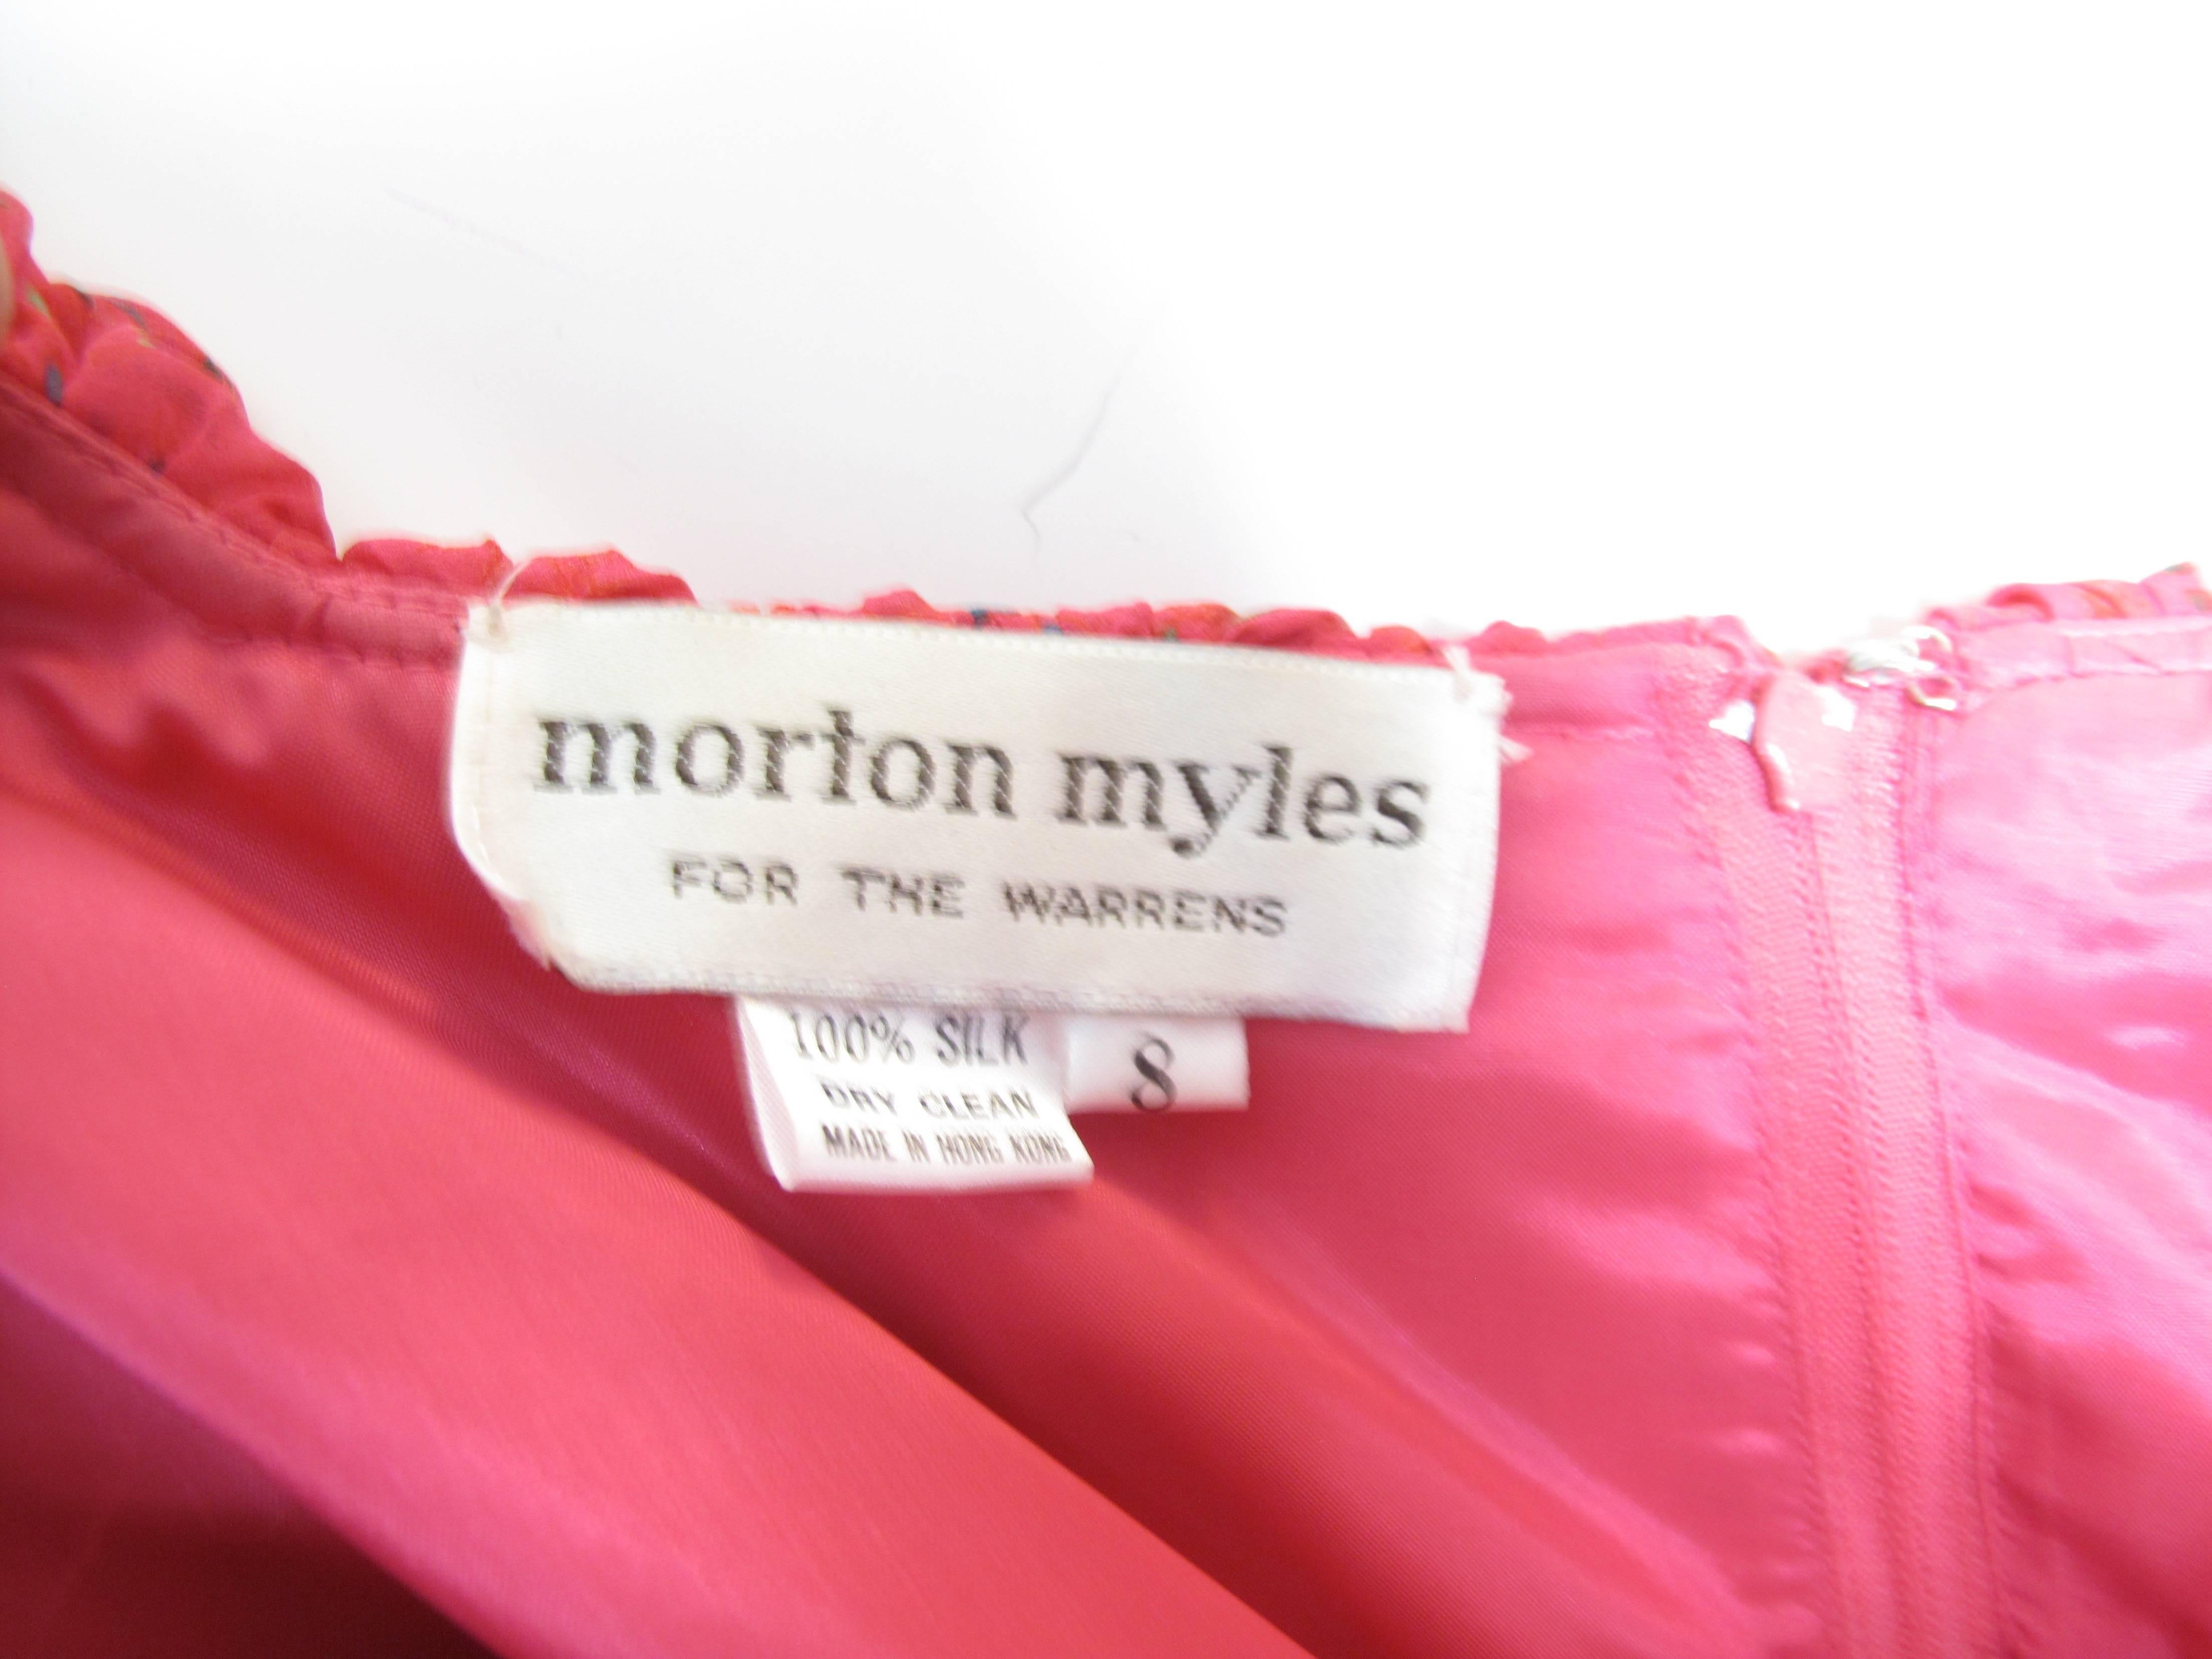 Morton Myles silk chiffon gown.  Condition: Excellent.  Size 8 

We offer free ground shipping within the US.  We accept returns for refund, please see our terms.  Please let us know if you have any questions. 